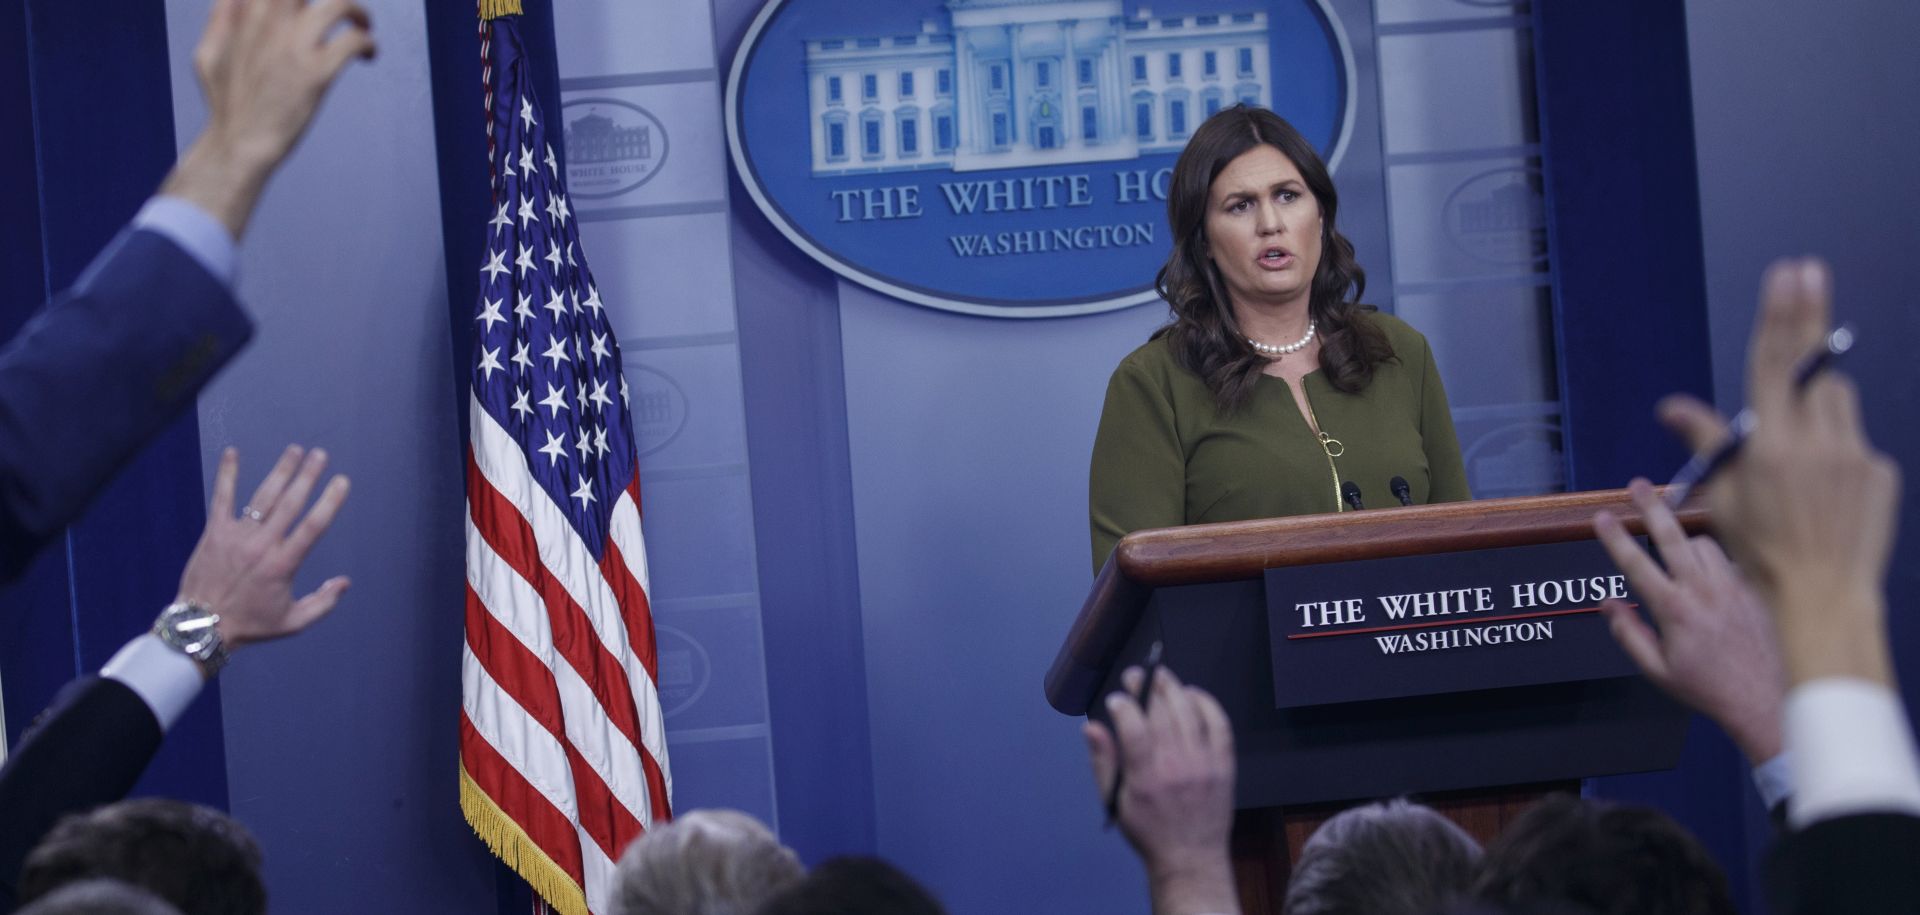 epa06650916 White House Press Secretary Sarah Huckabee Sanders responds to a question from the news media during the daily briefing at the White House in Washington, DC, USA 06 April 2018. Sanders announced a private dinner at Mt. Vernon with French President Emmanuel Macron as well as fielded questions on trade and Amazon.  EPA/SHAWN THEW